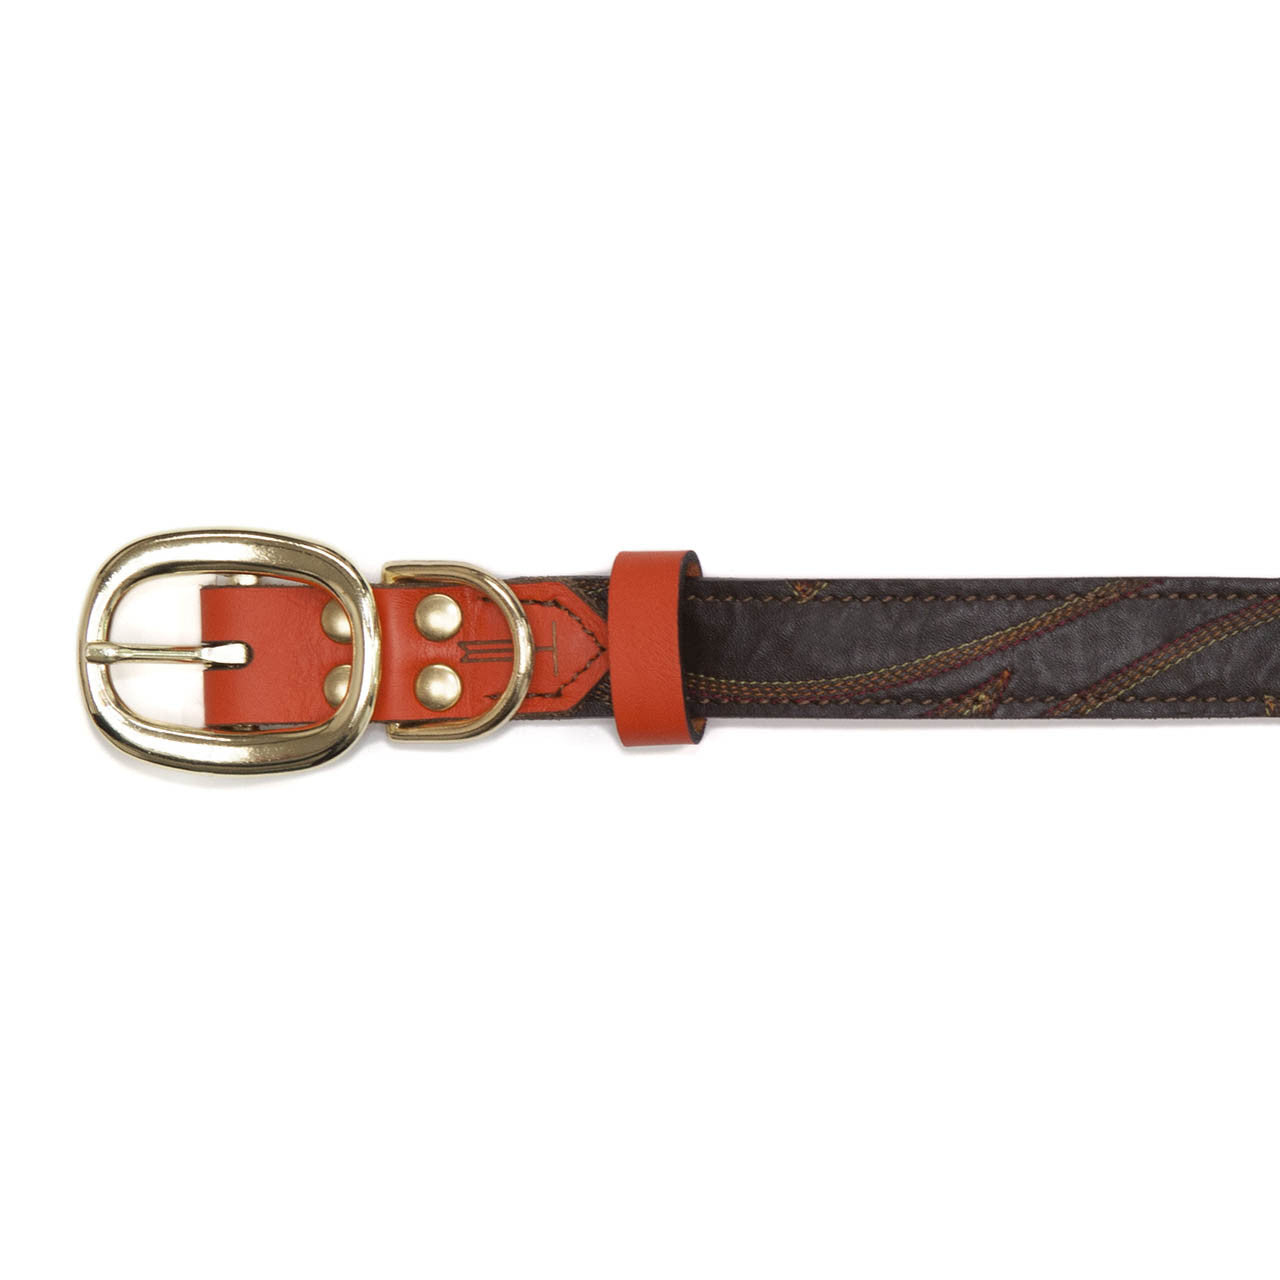 Orange Dog Collar with Medium Brown Leather + Multicolor Stitching (buckle)